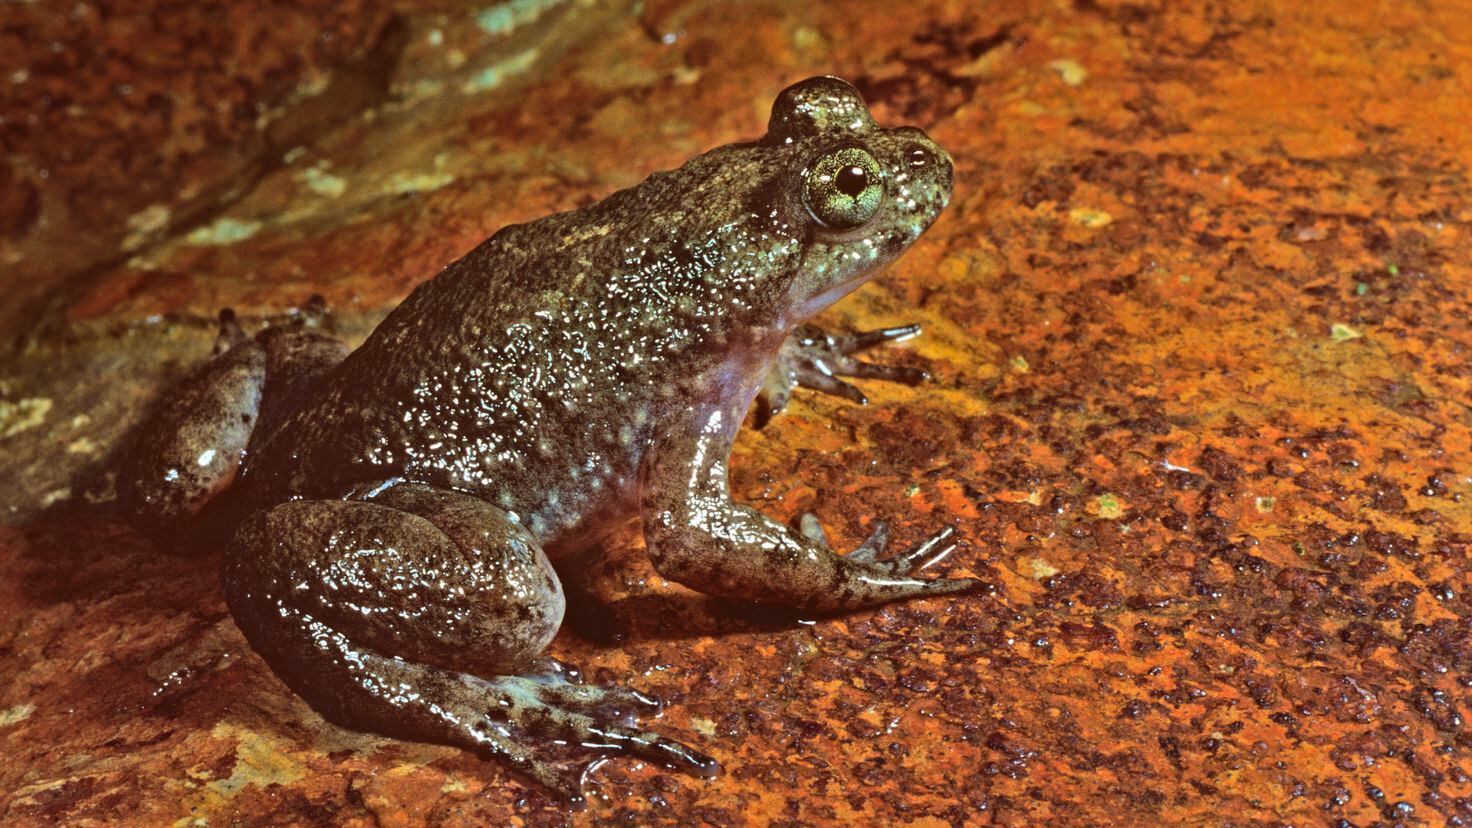 An unexpected discovery about frogs